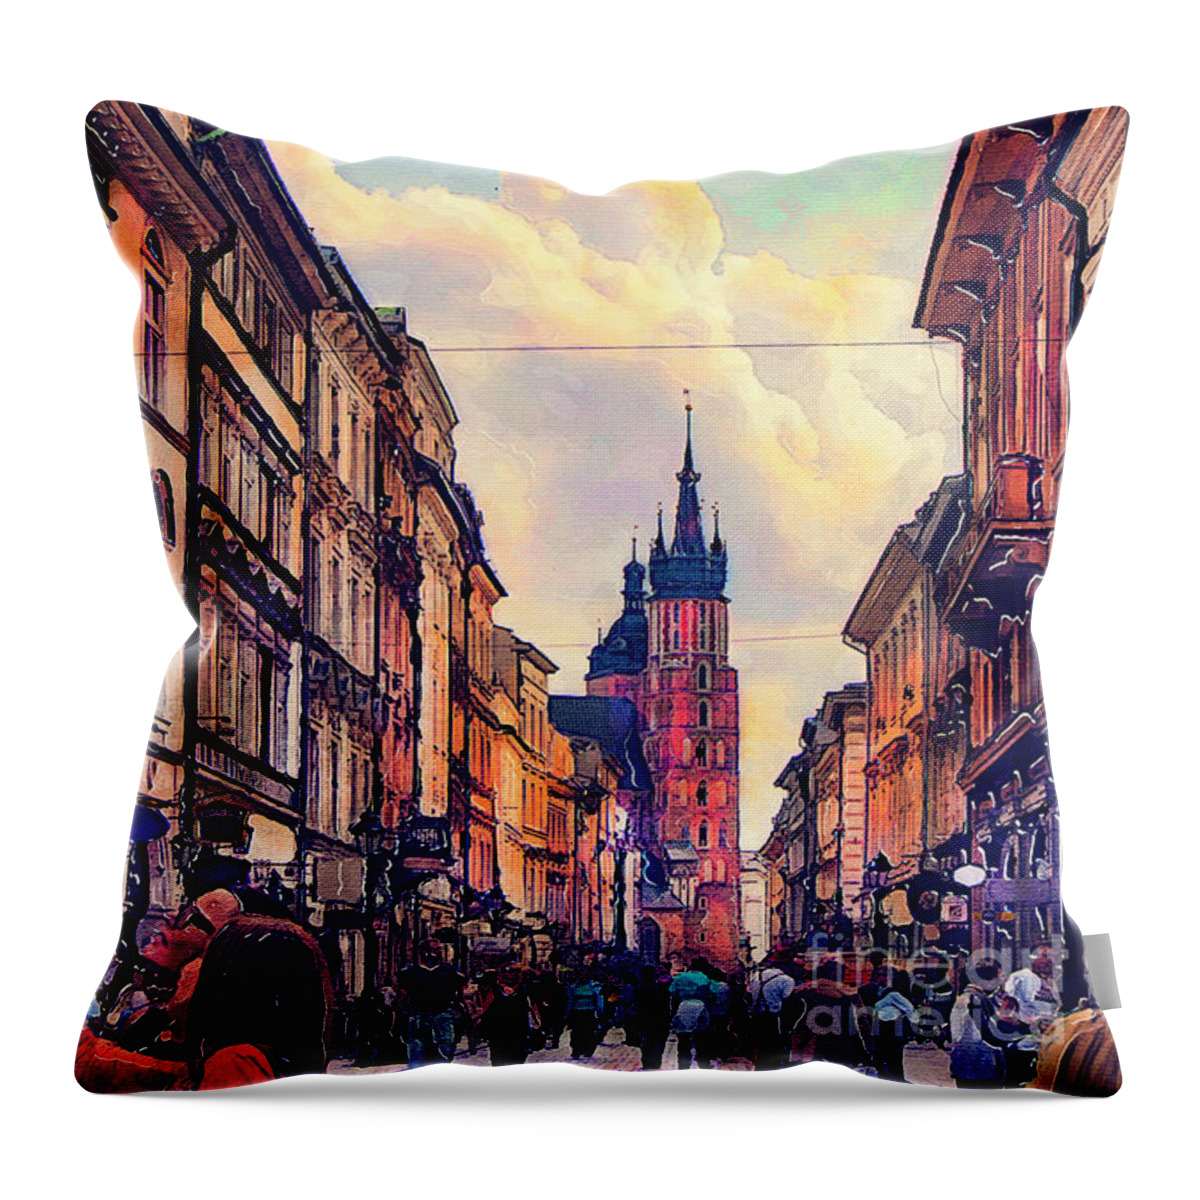 Cracow Throw Pillow featuring the painting Cracow Florianska street by Justyna Jaszke JBJart